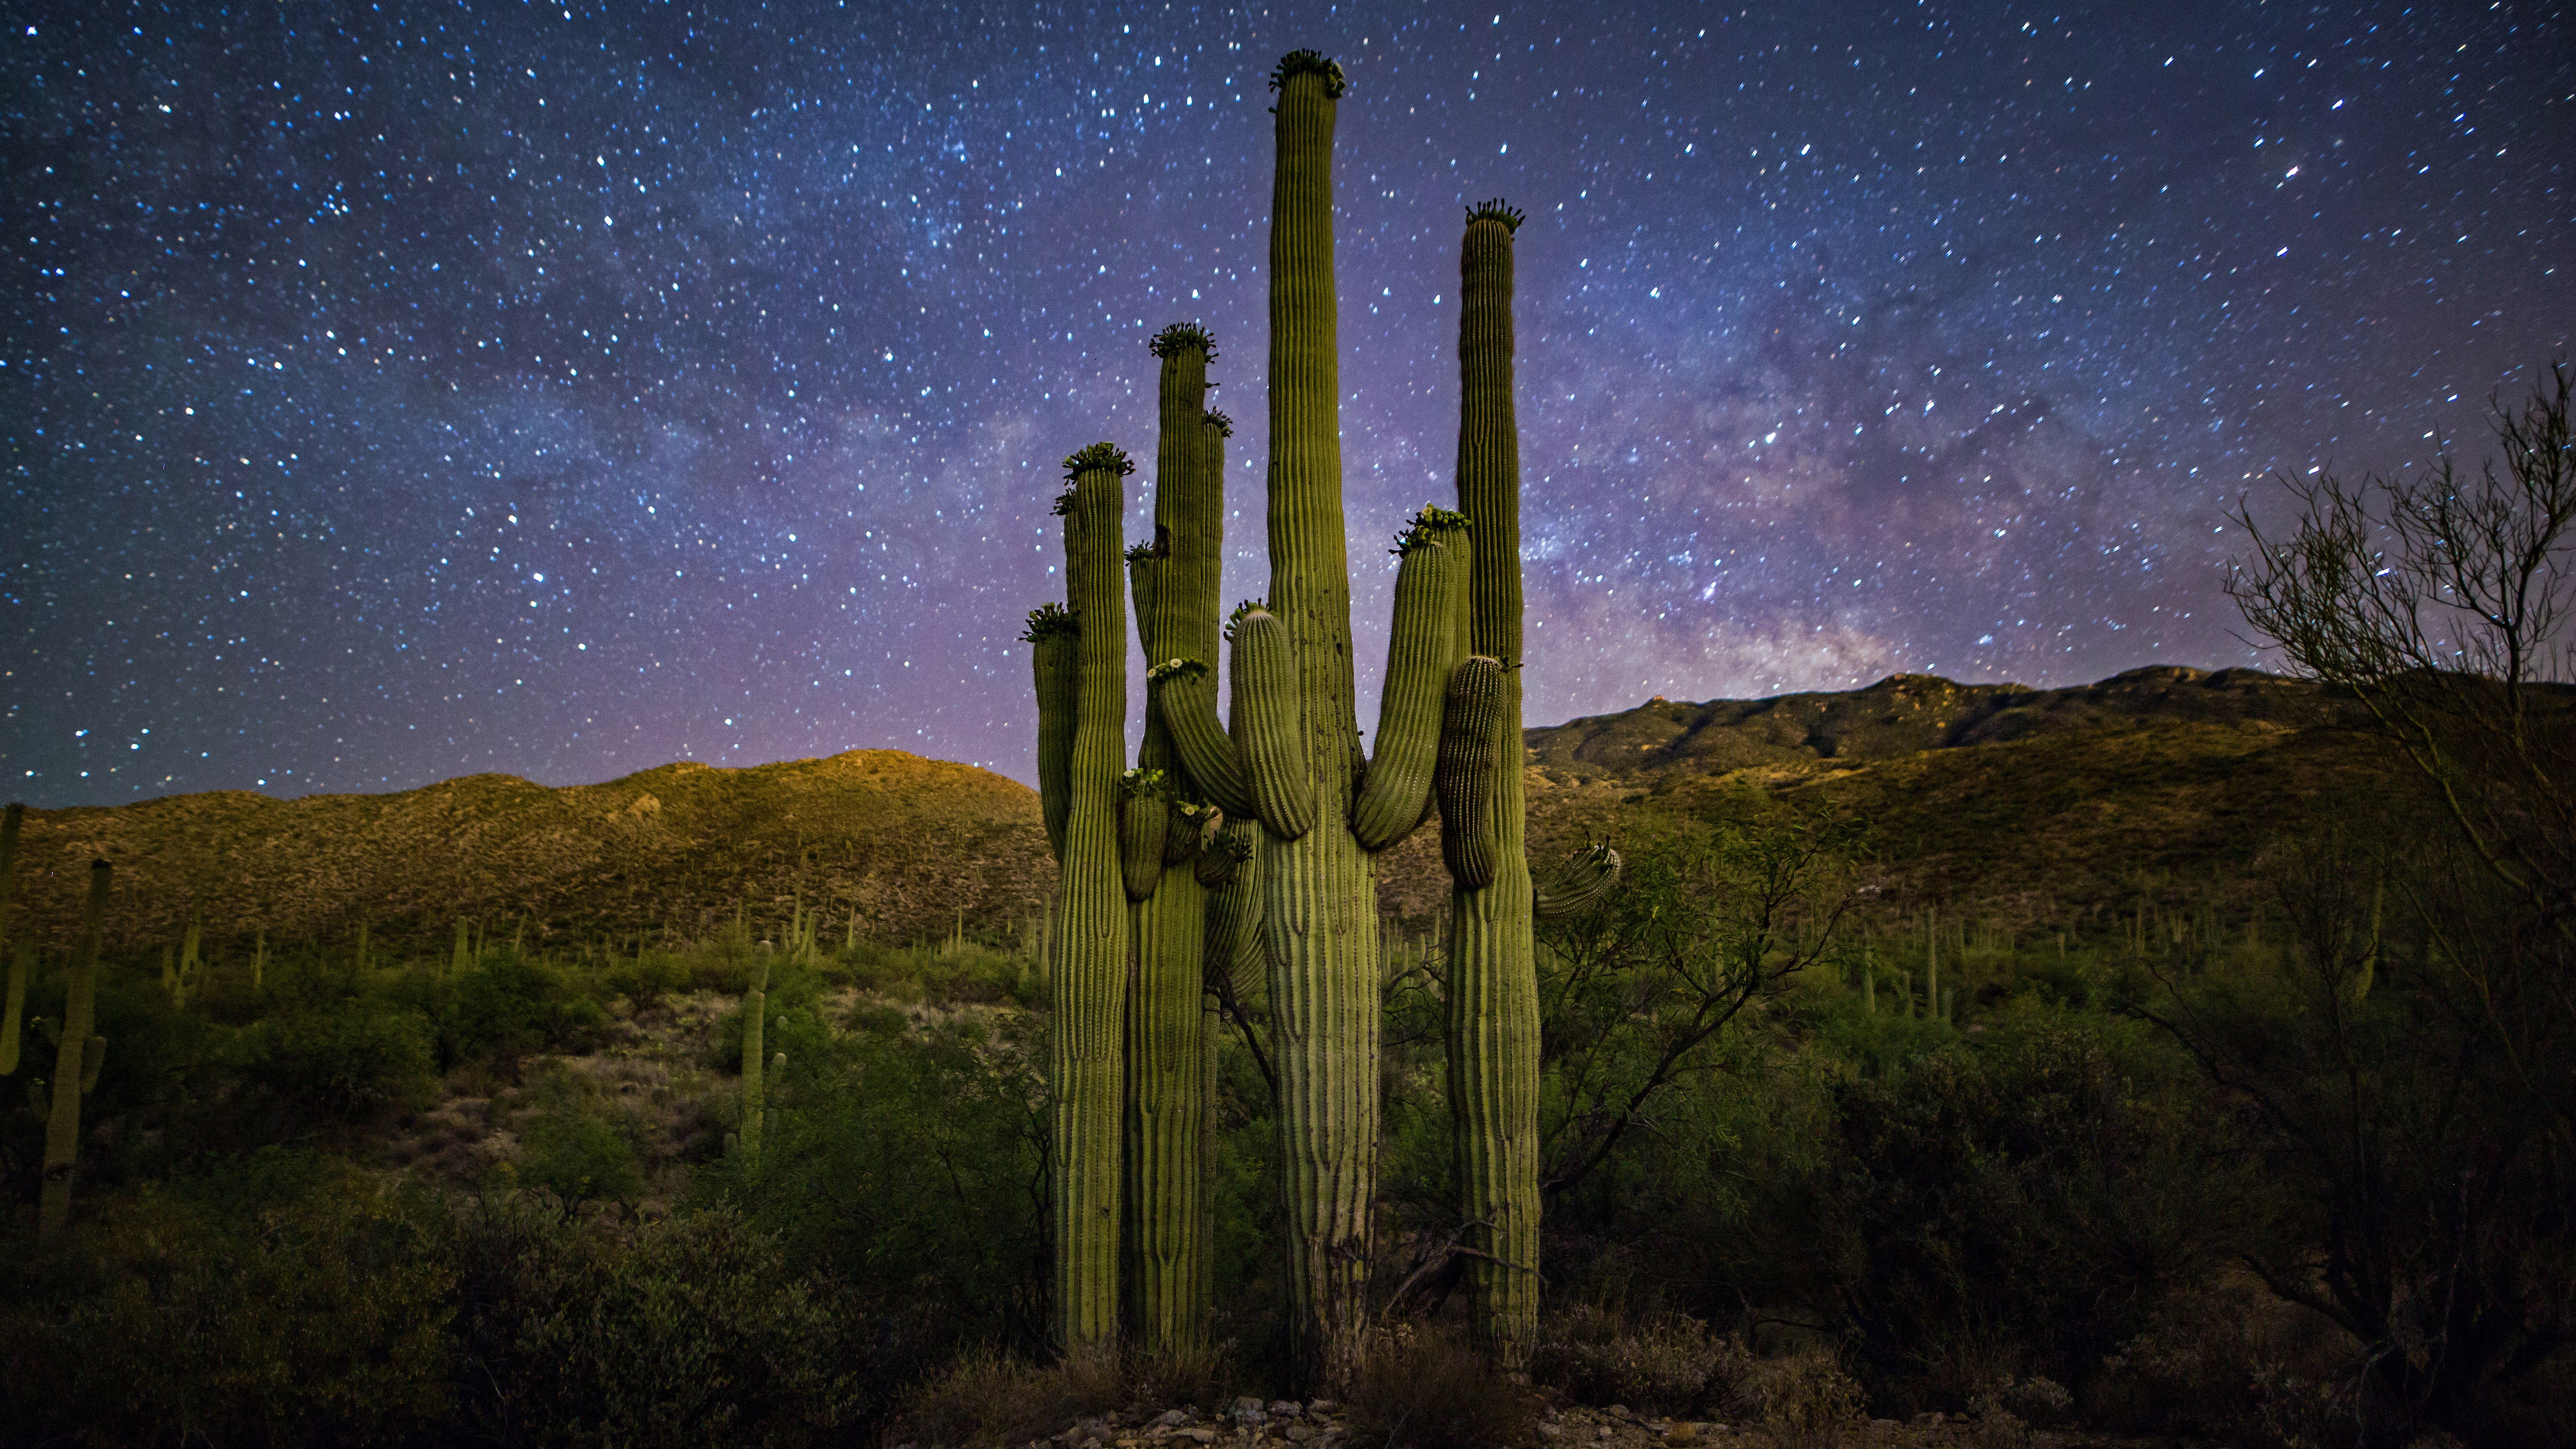 Family of Saguaros and the Milky Way in Saguaro National Park, Arizona by Christian Garcia